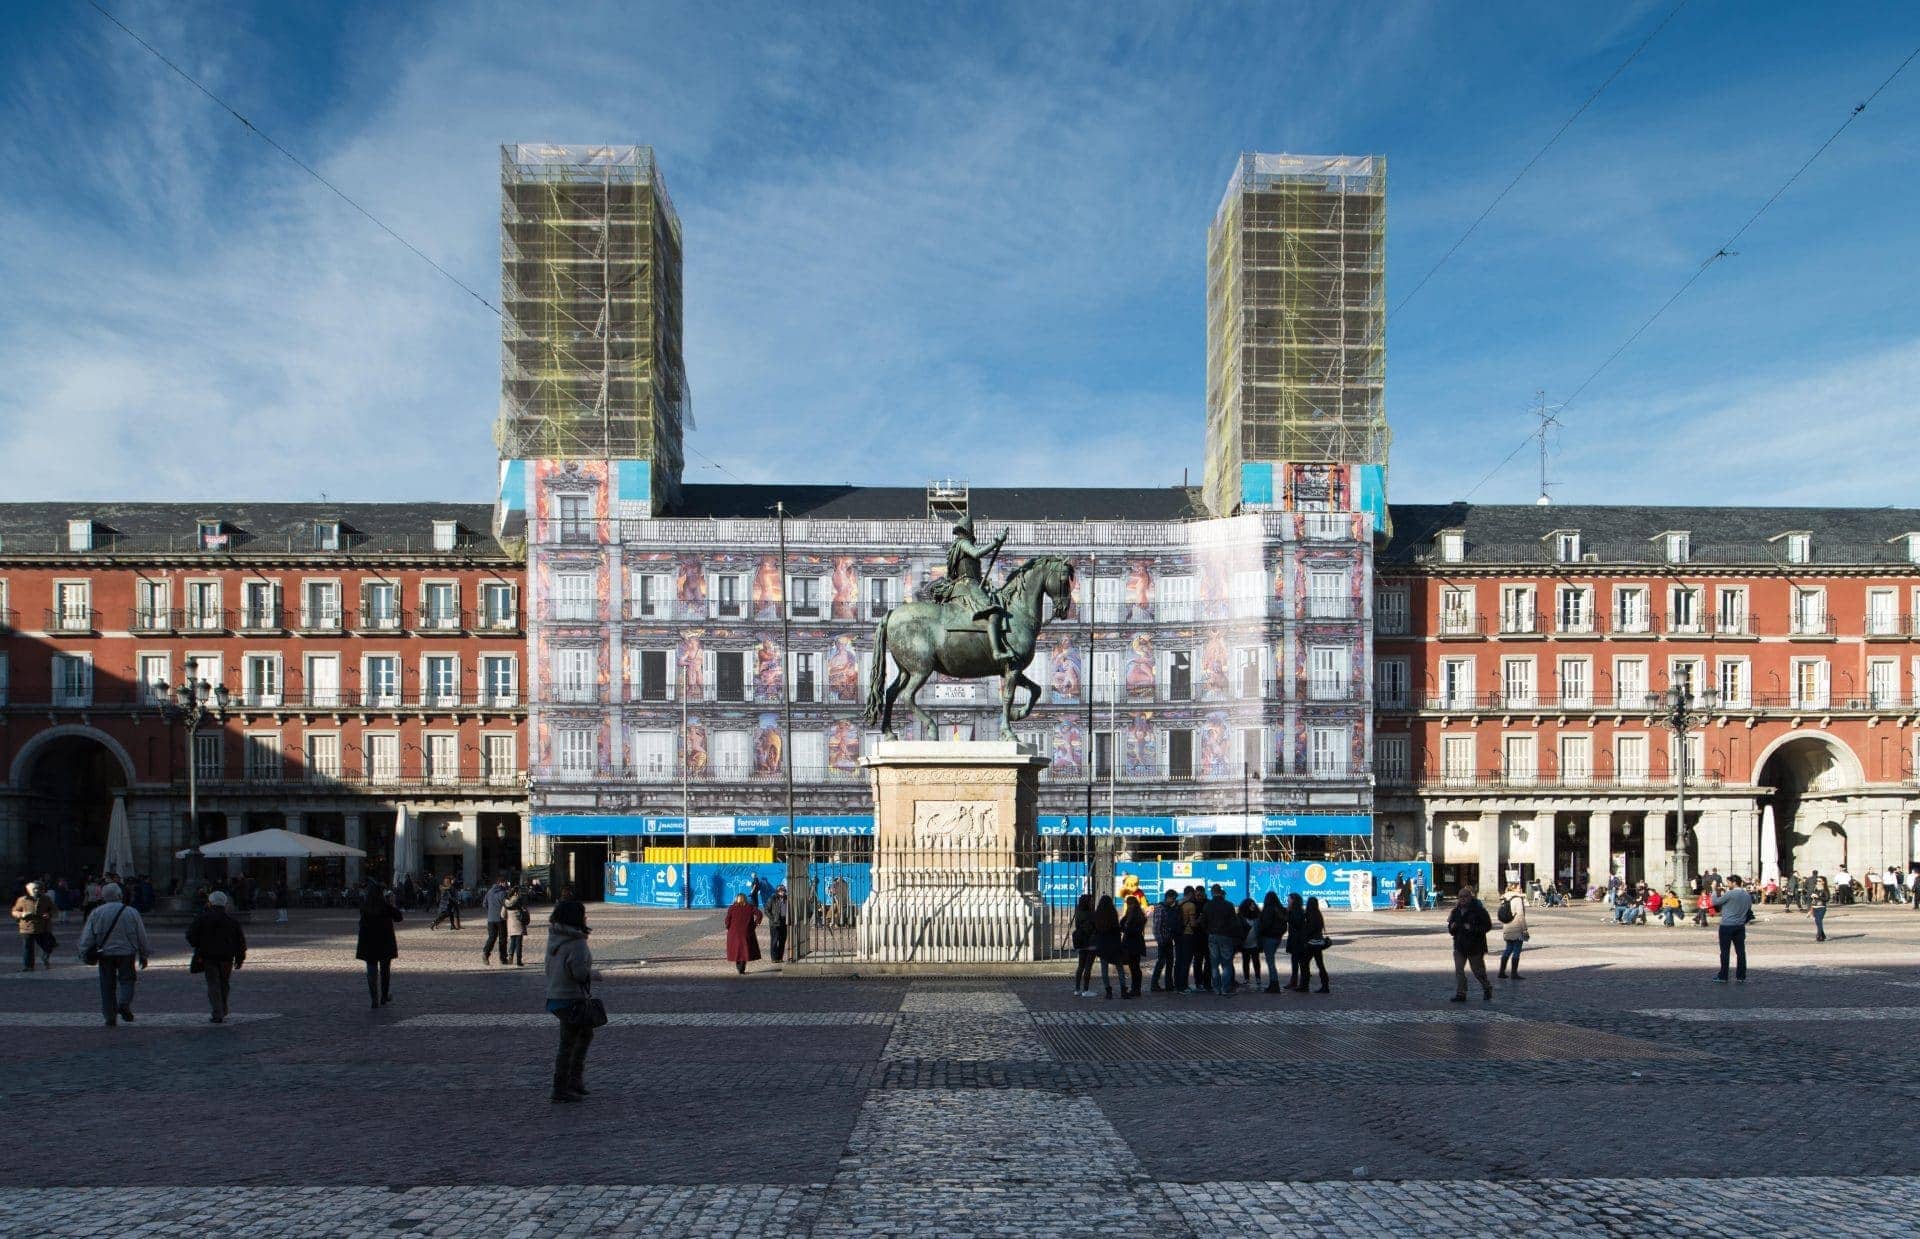 Ferrovial Agroman carried out the refurbishment of Casa de la Panadería, at Madrid's Plaza Mayor (Main Square)